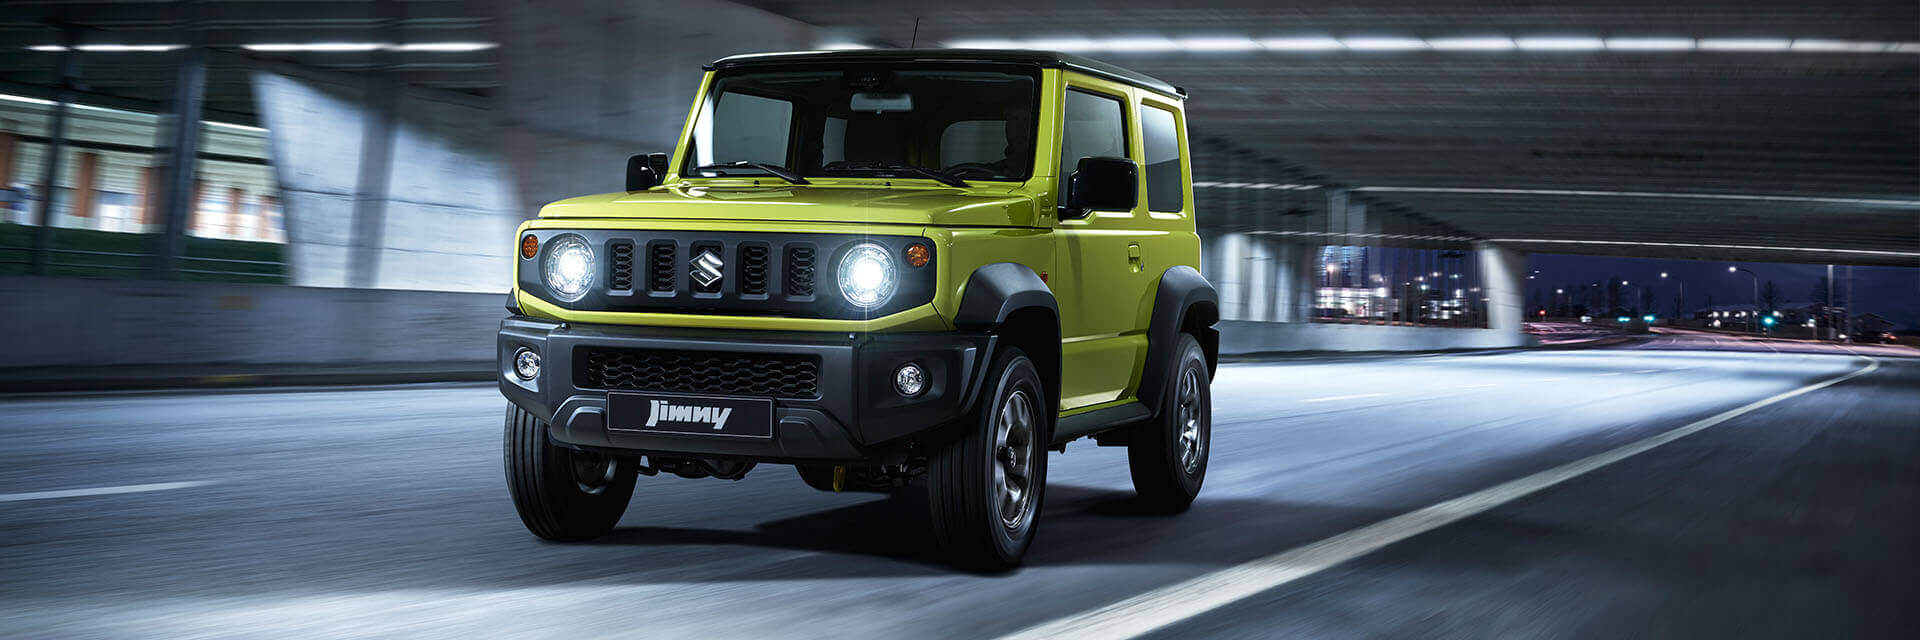 Jimny Overview 3